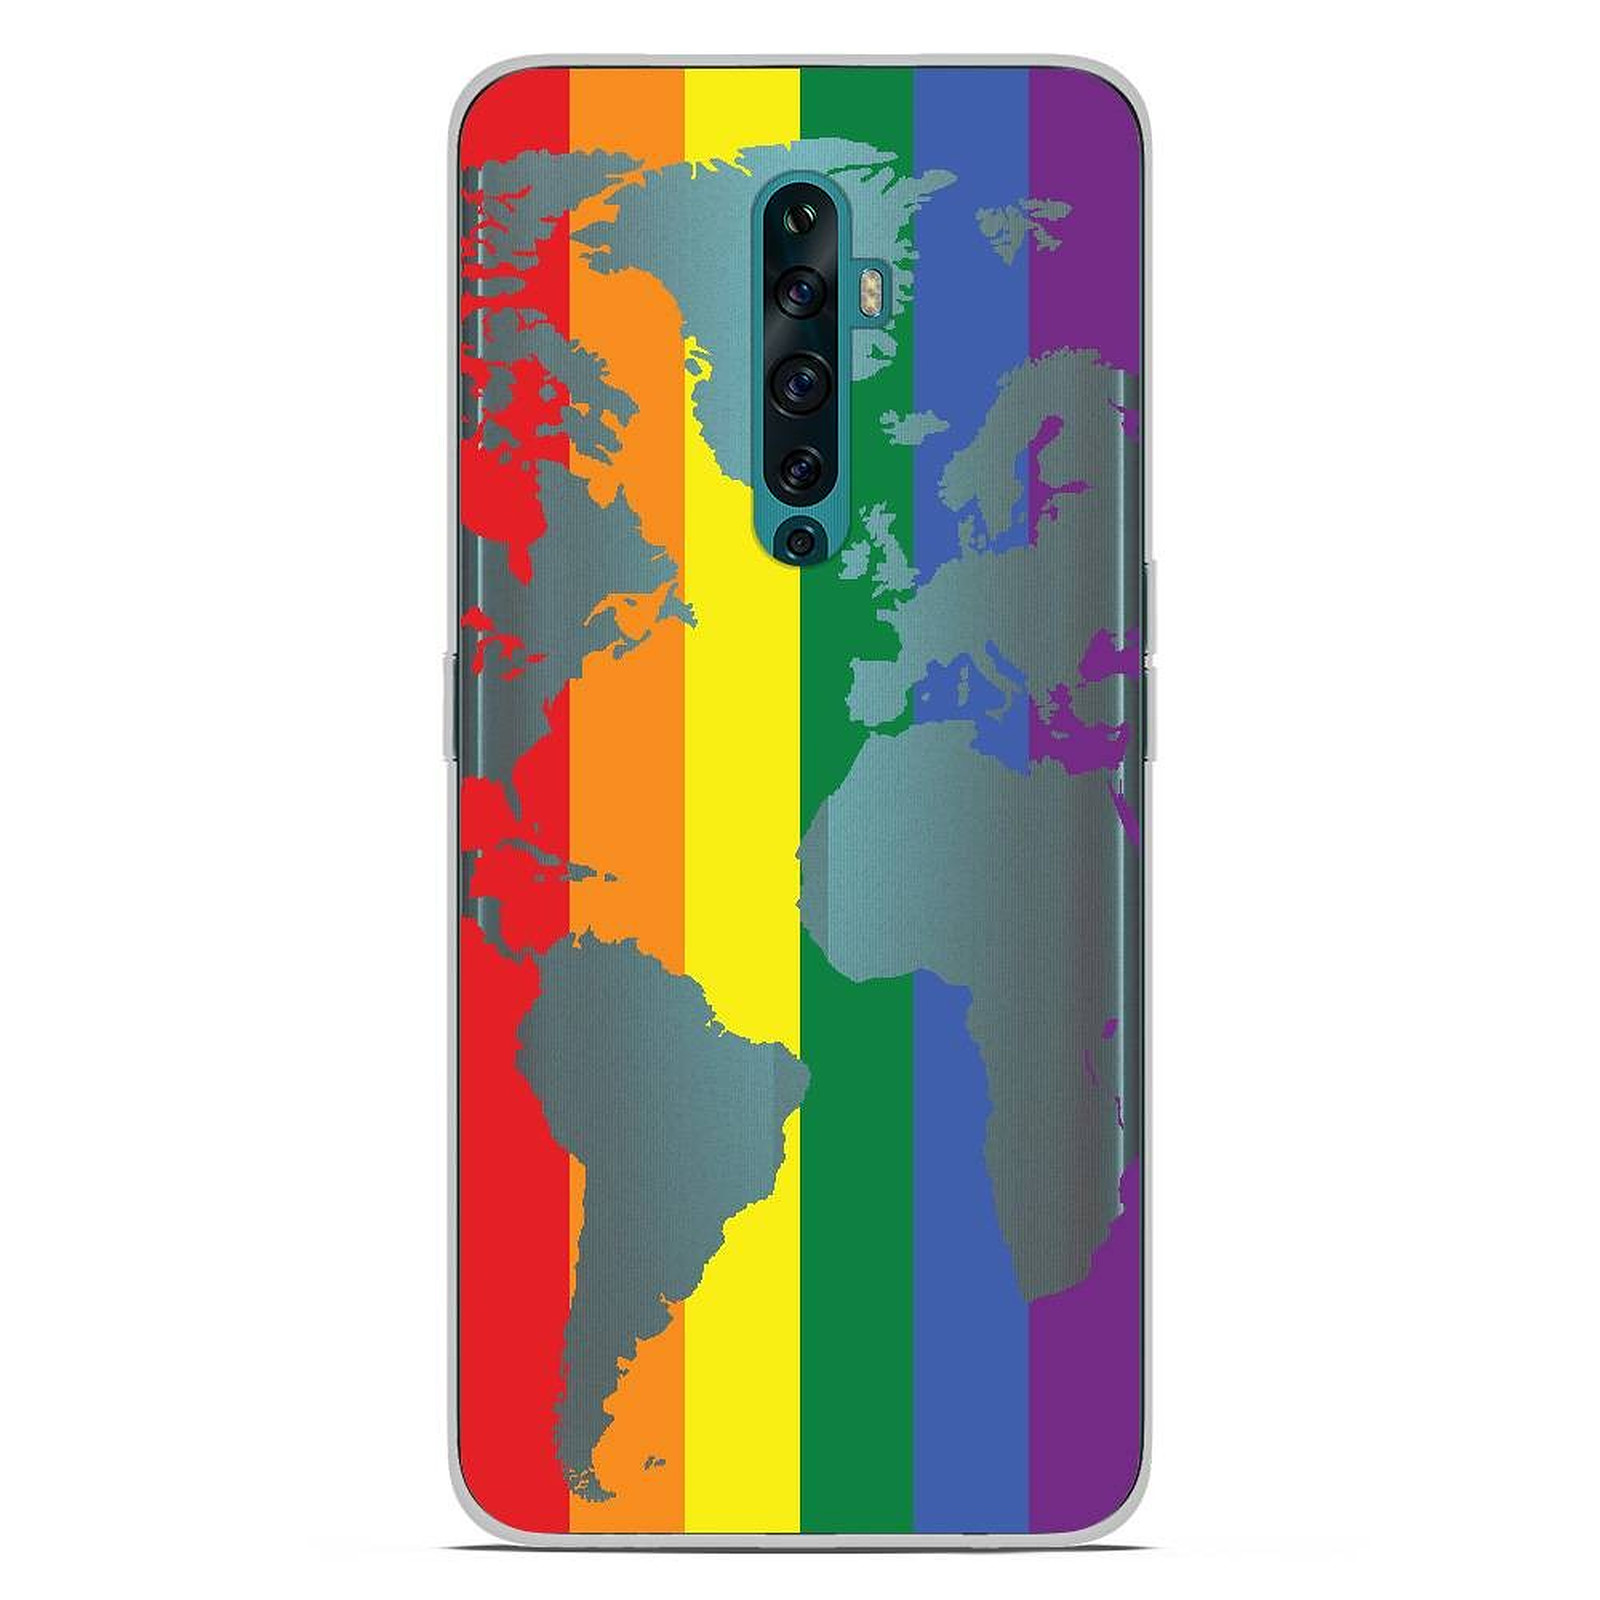 1001 Coques Coque silicone gel Oppo Reno 2Z motif Map LGBT - Coque telephone 1001Coques